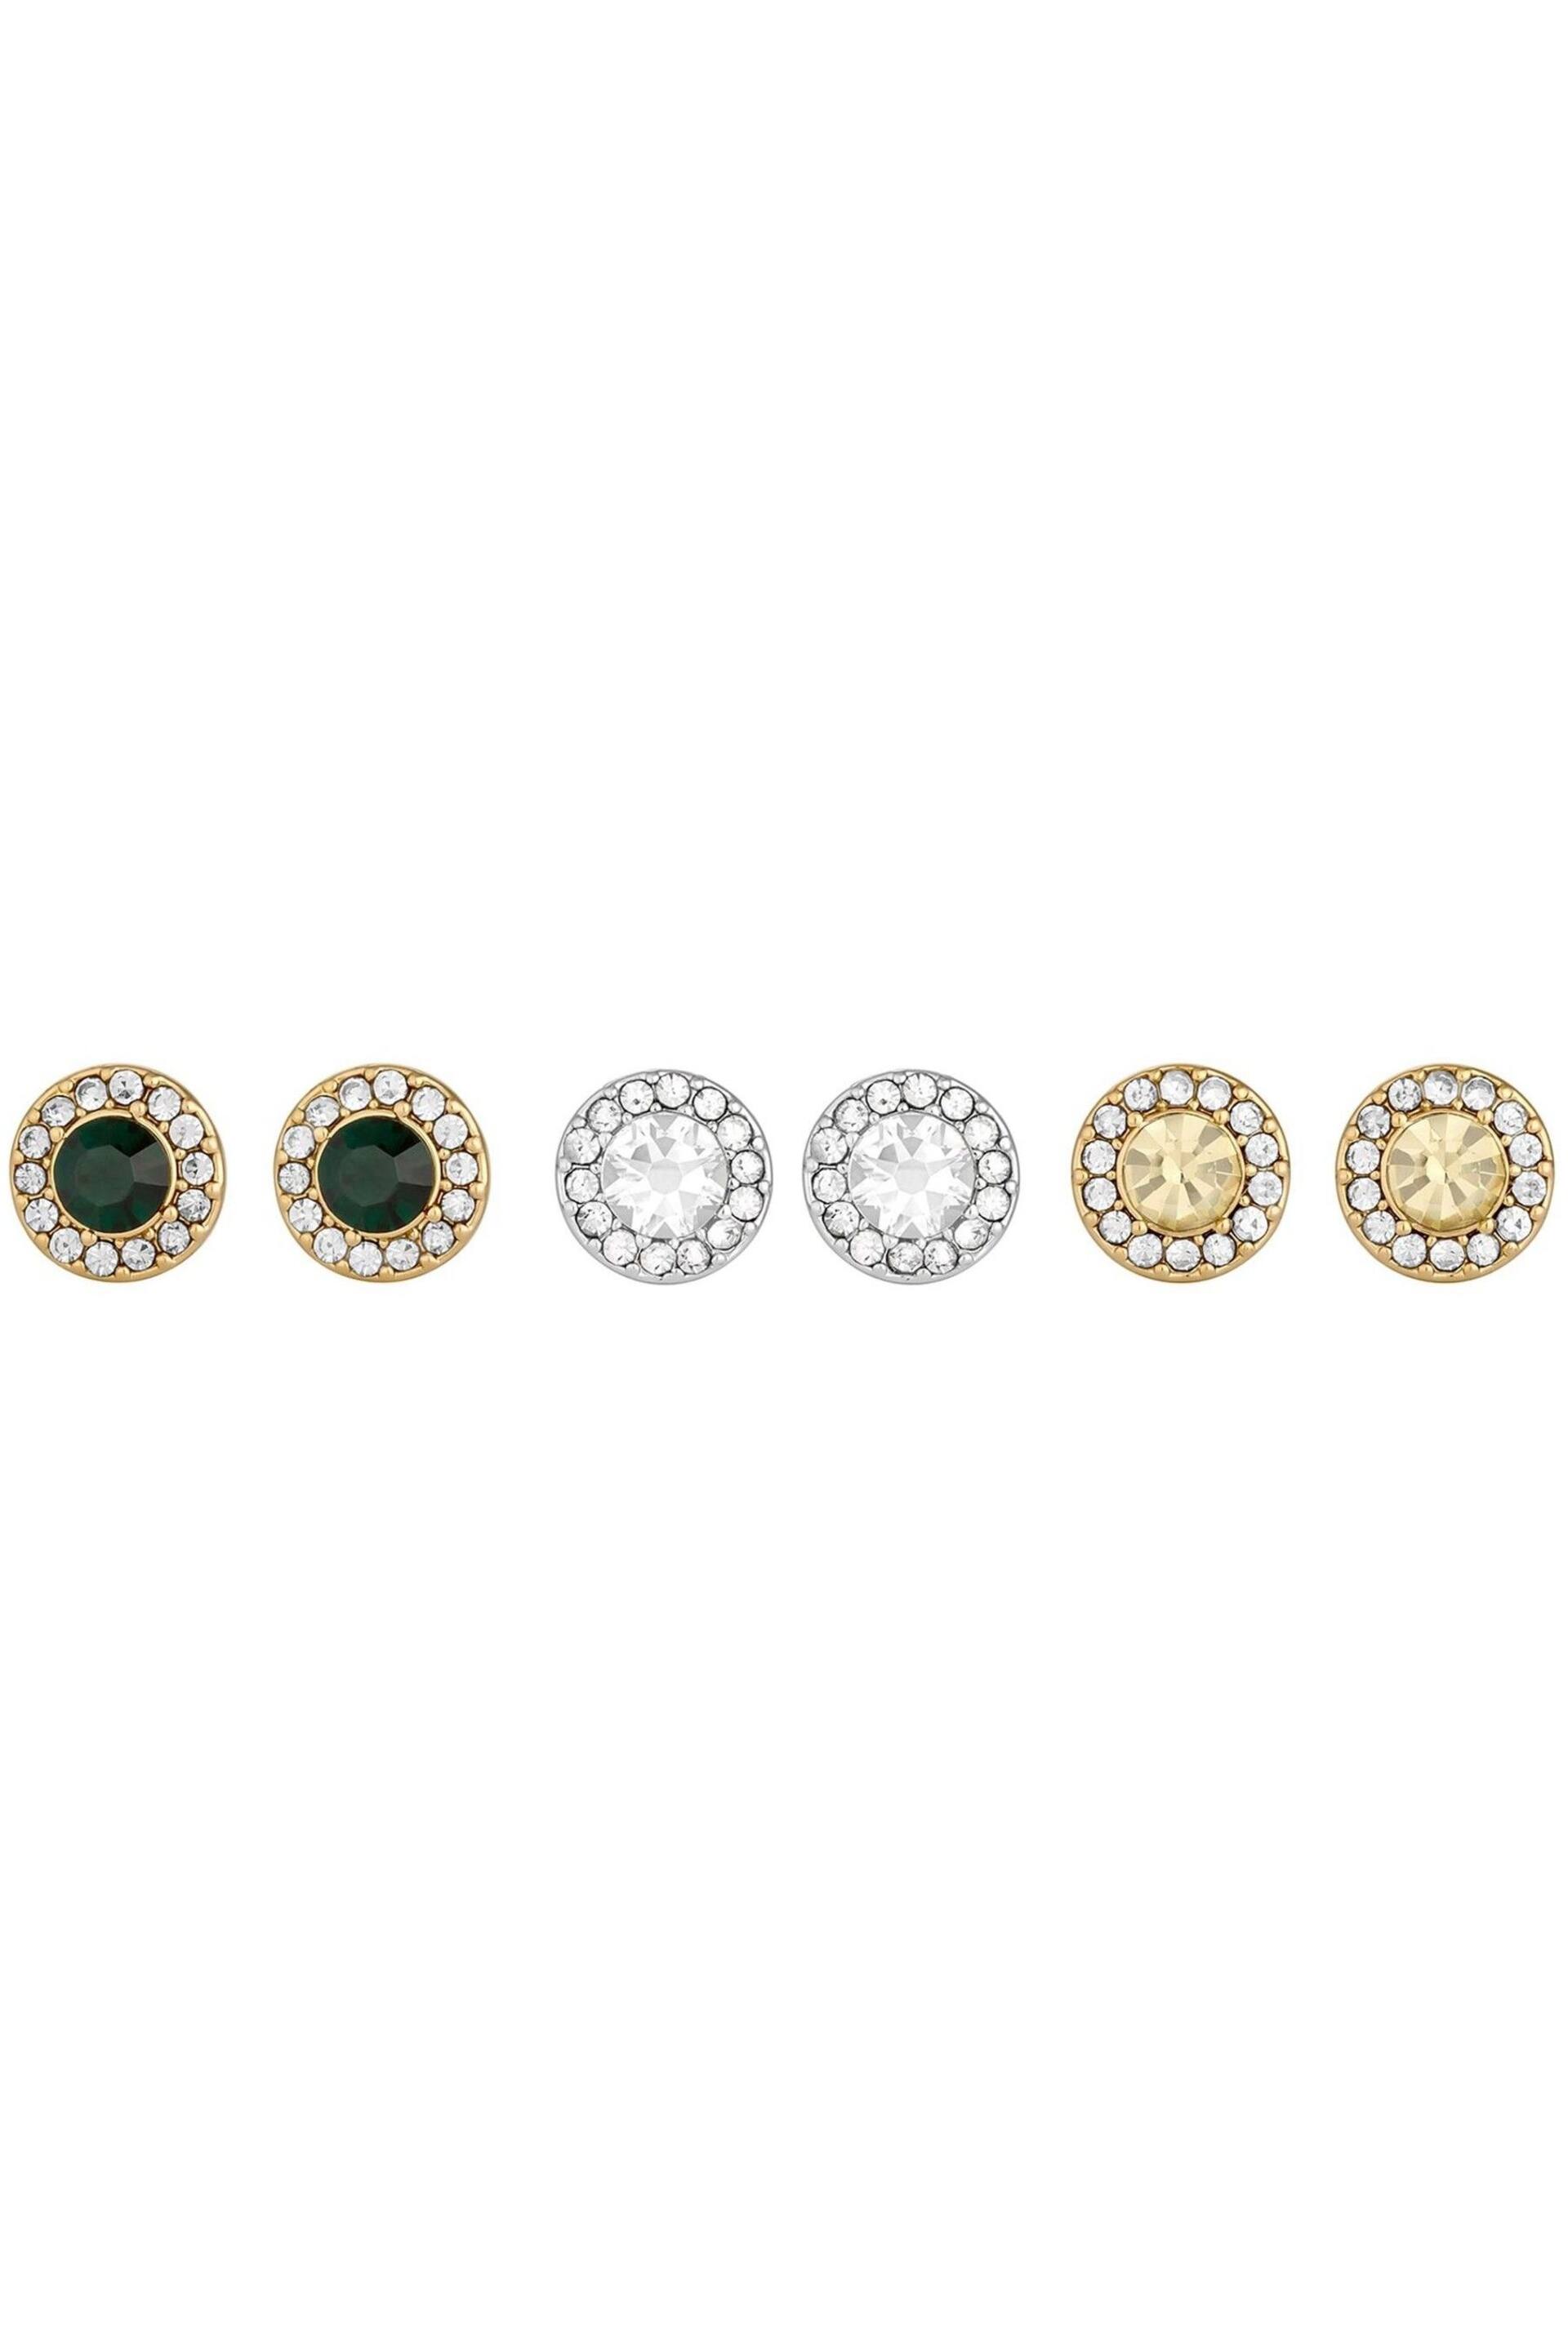 Mood Silver/Gold Stud Earrings Pack of 3 - Image 1 of 2